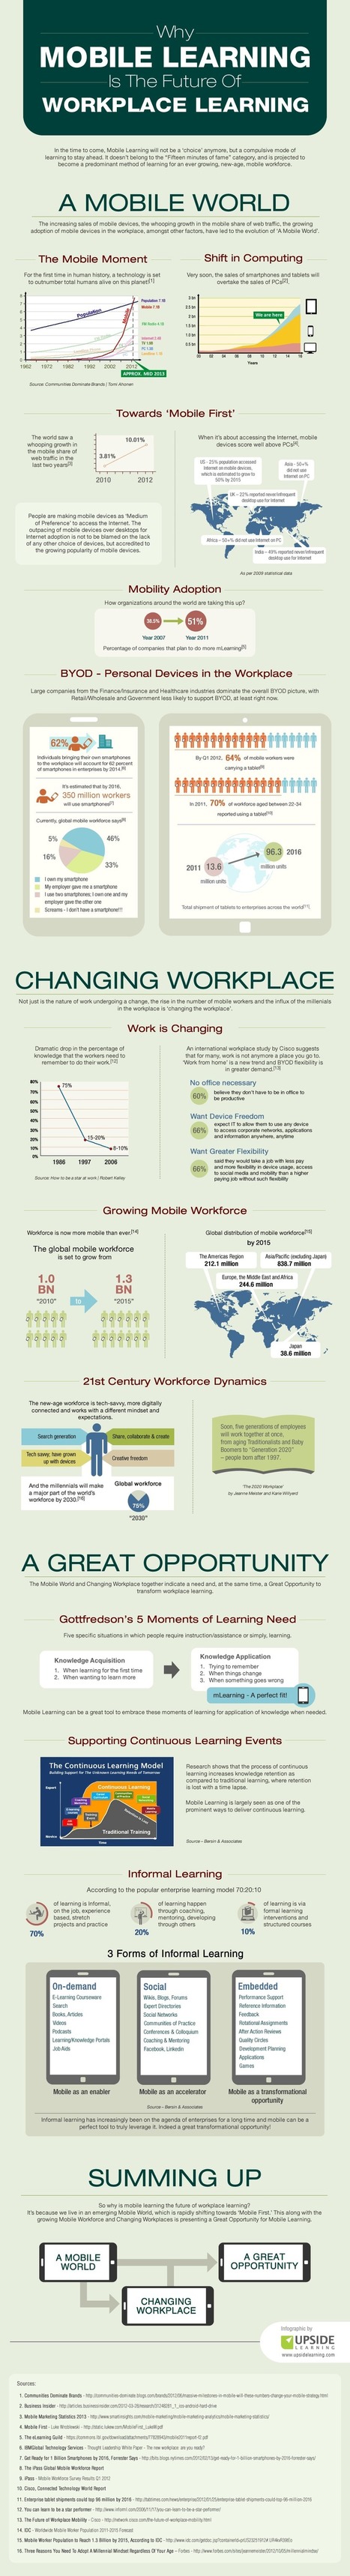 The Importance Of Mobile Learning In (And Out Of) The Classroom [Infographic] | 21st Century Learning and Teaching | Scoop.it